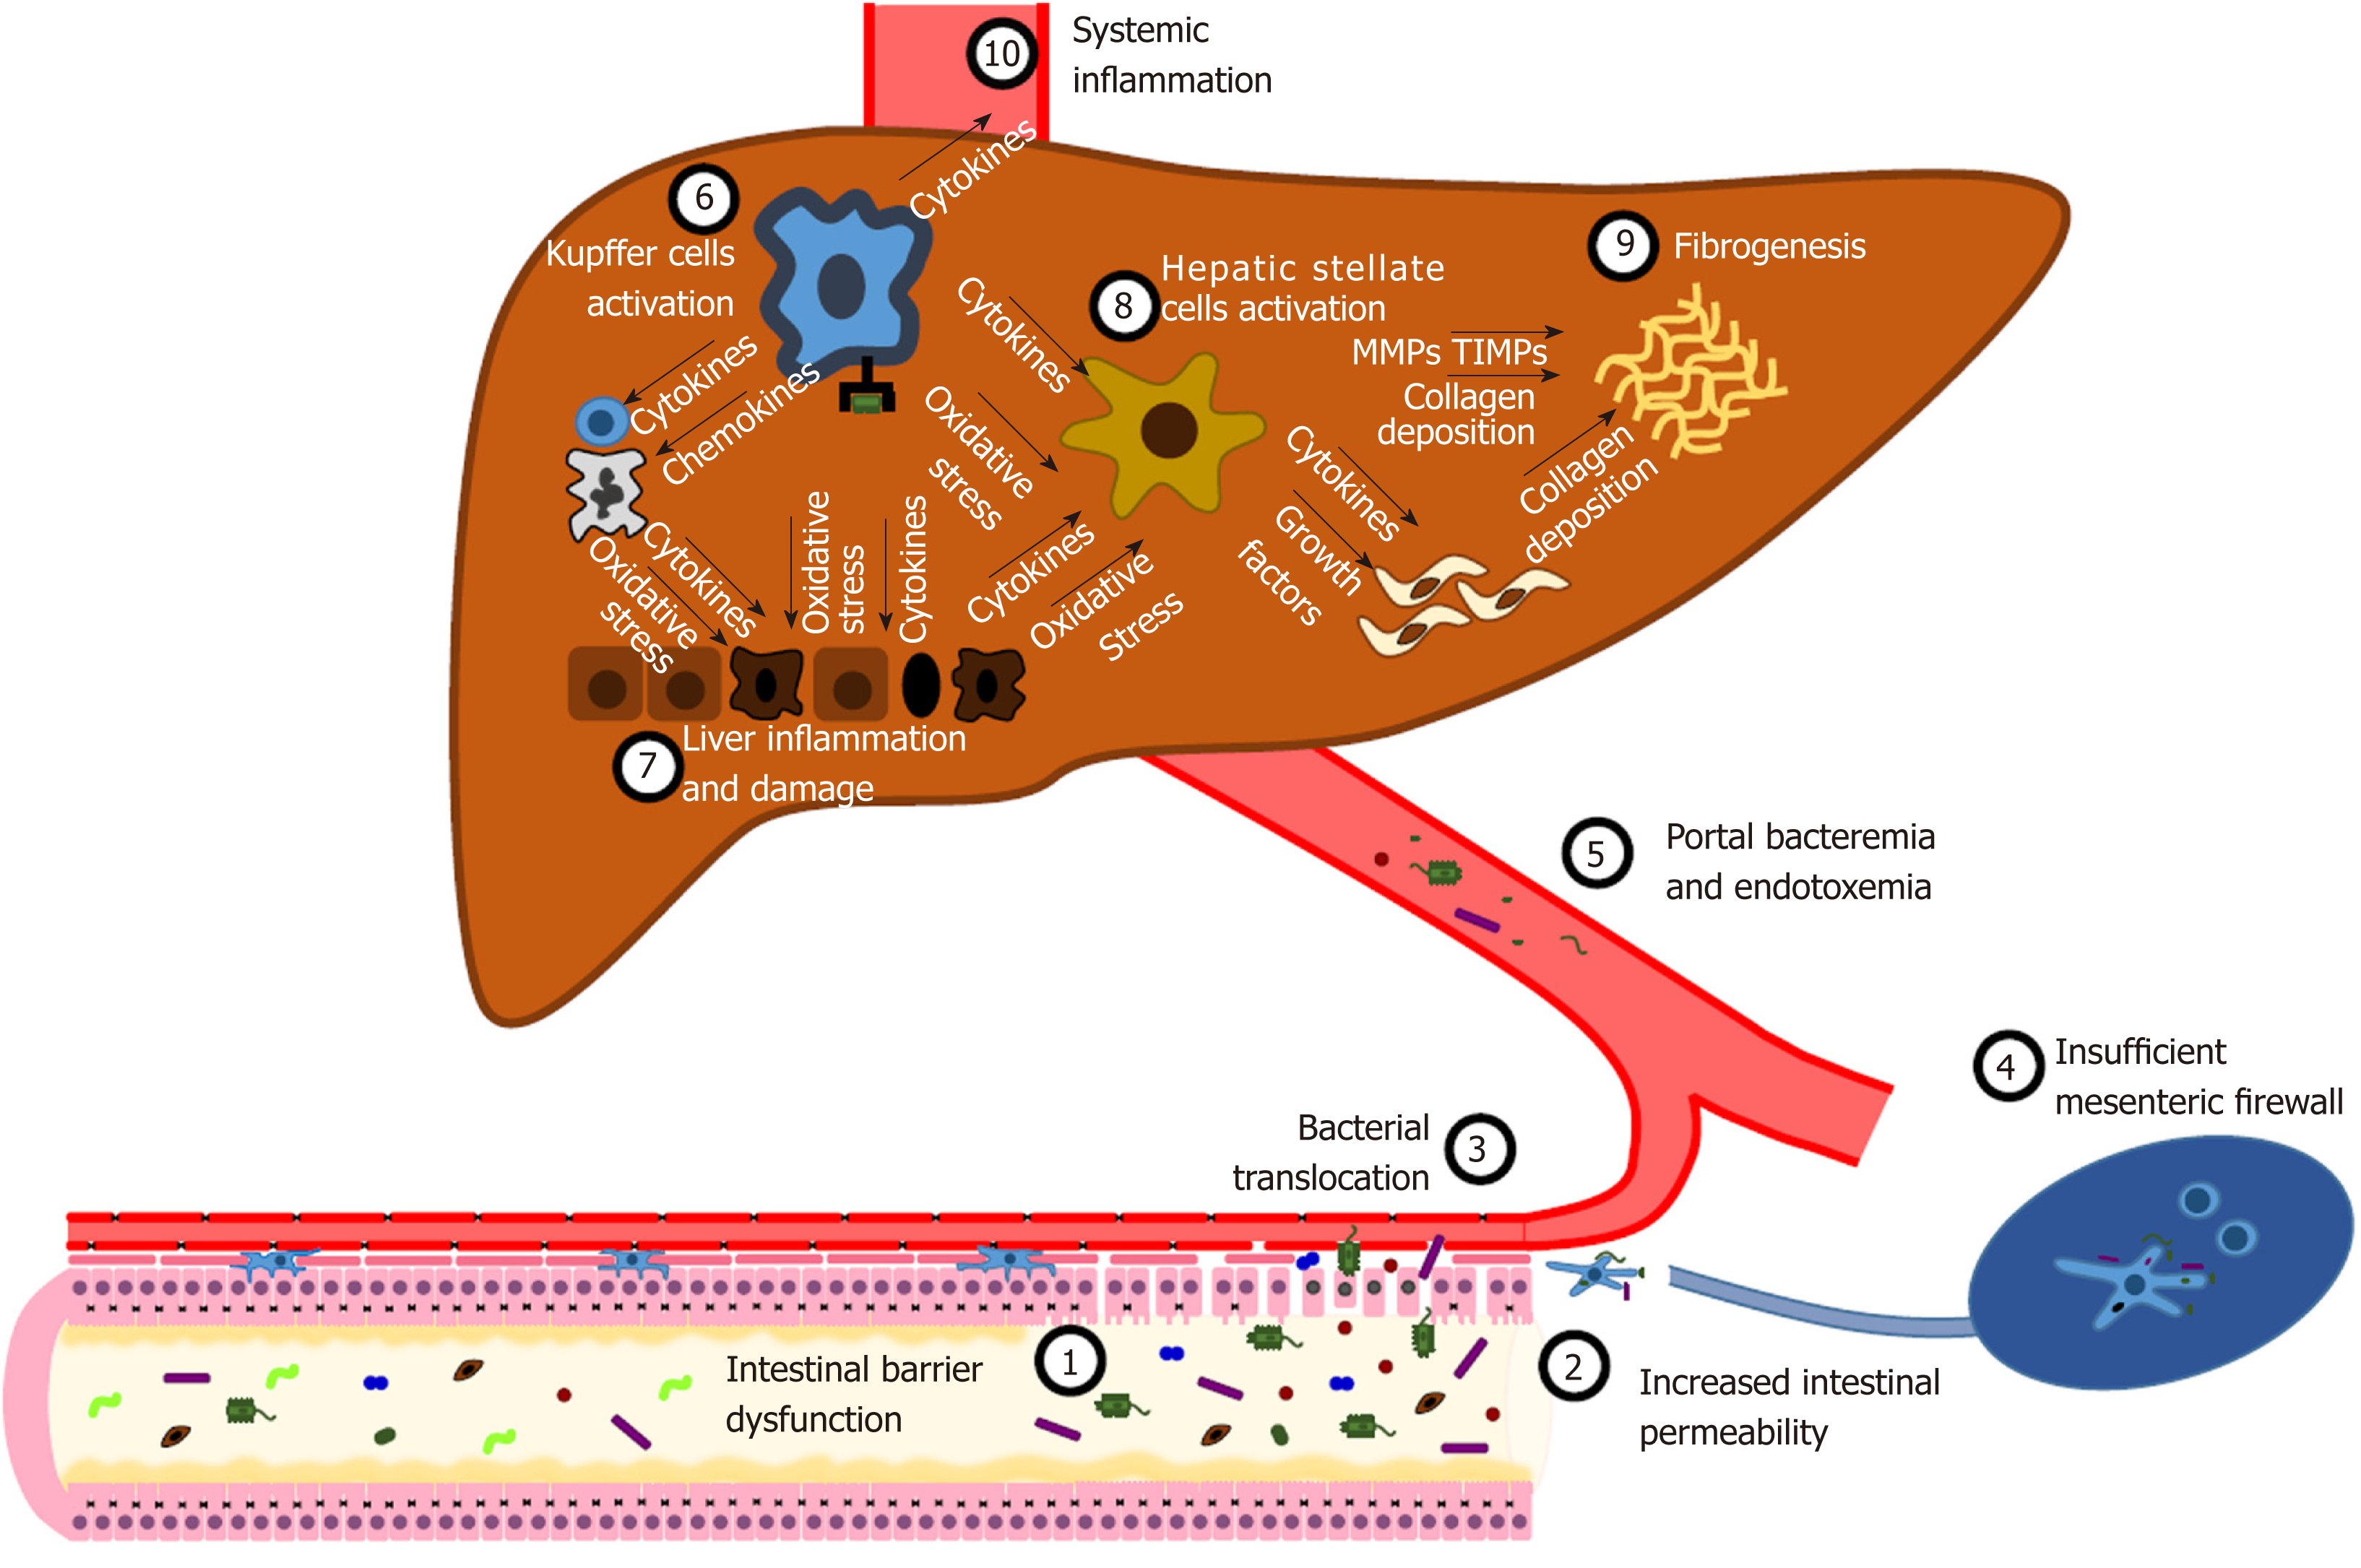 Diagram of increased intestinal permeability, bacterial translocation, and liver absorption.